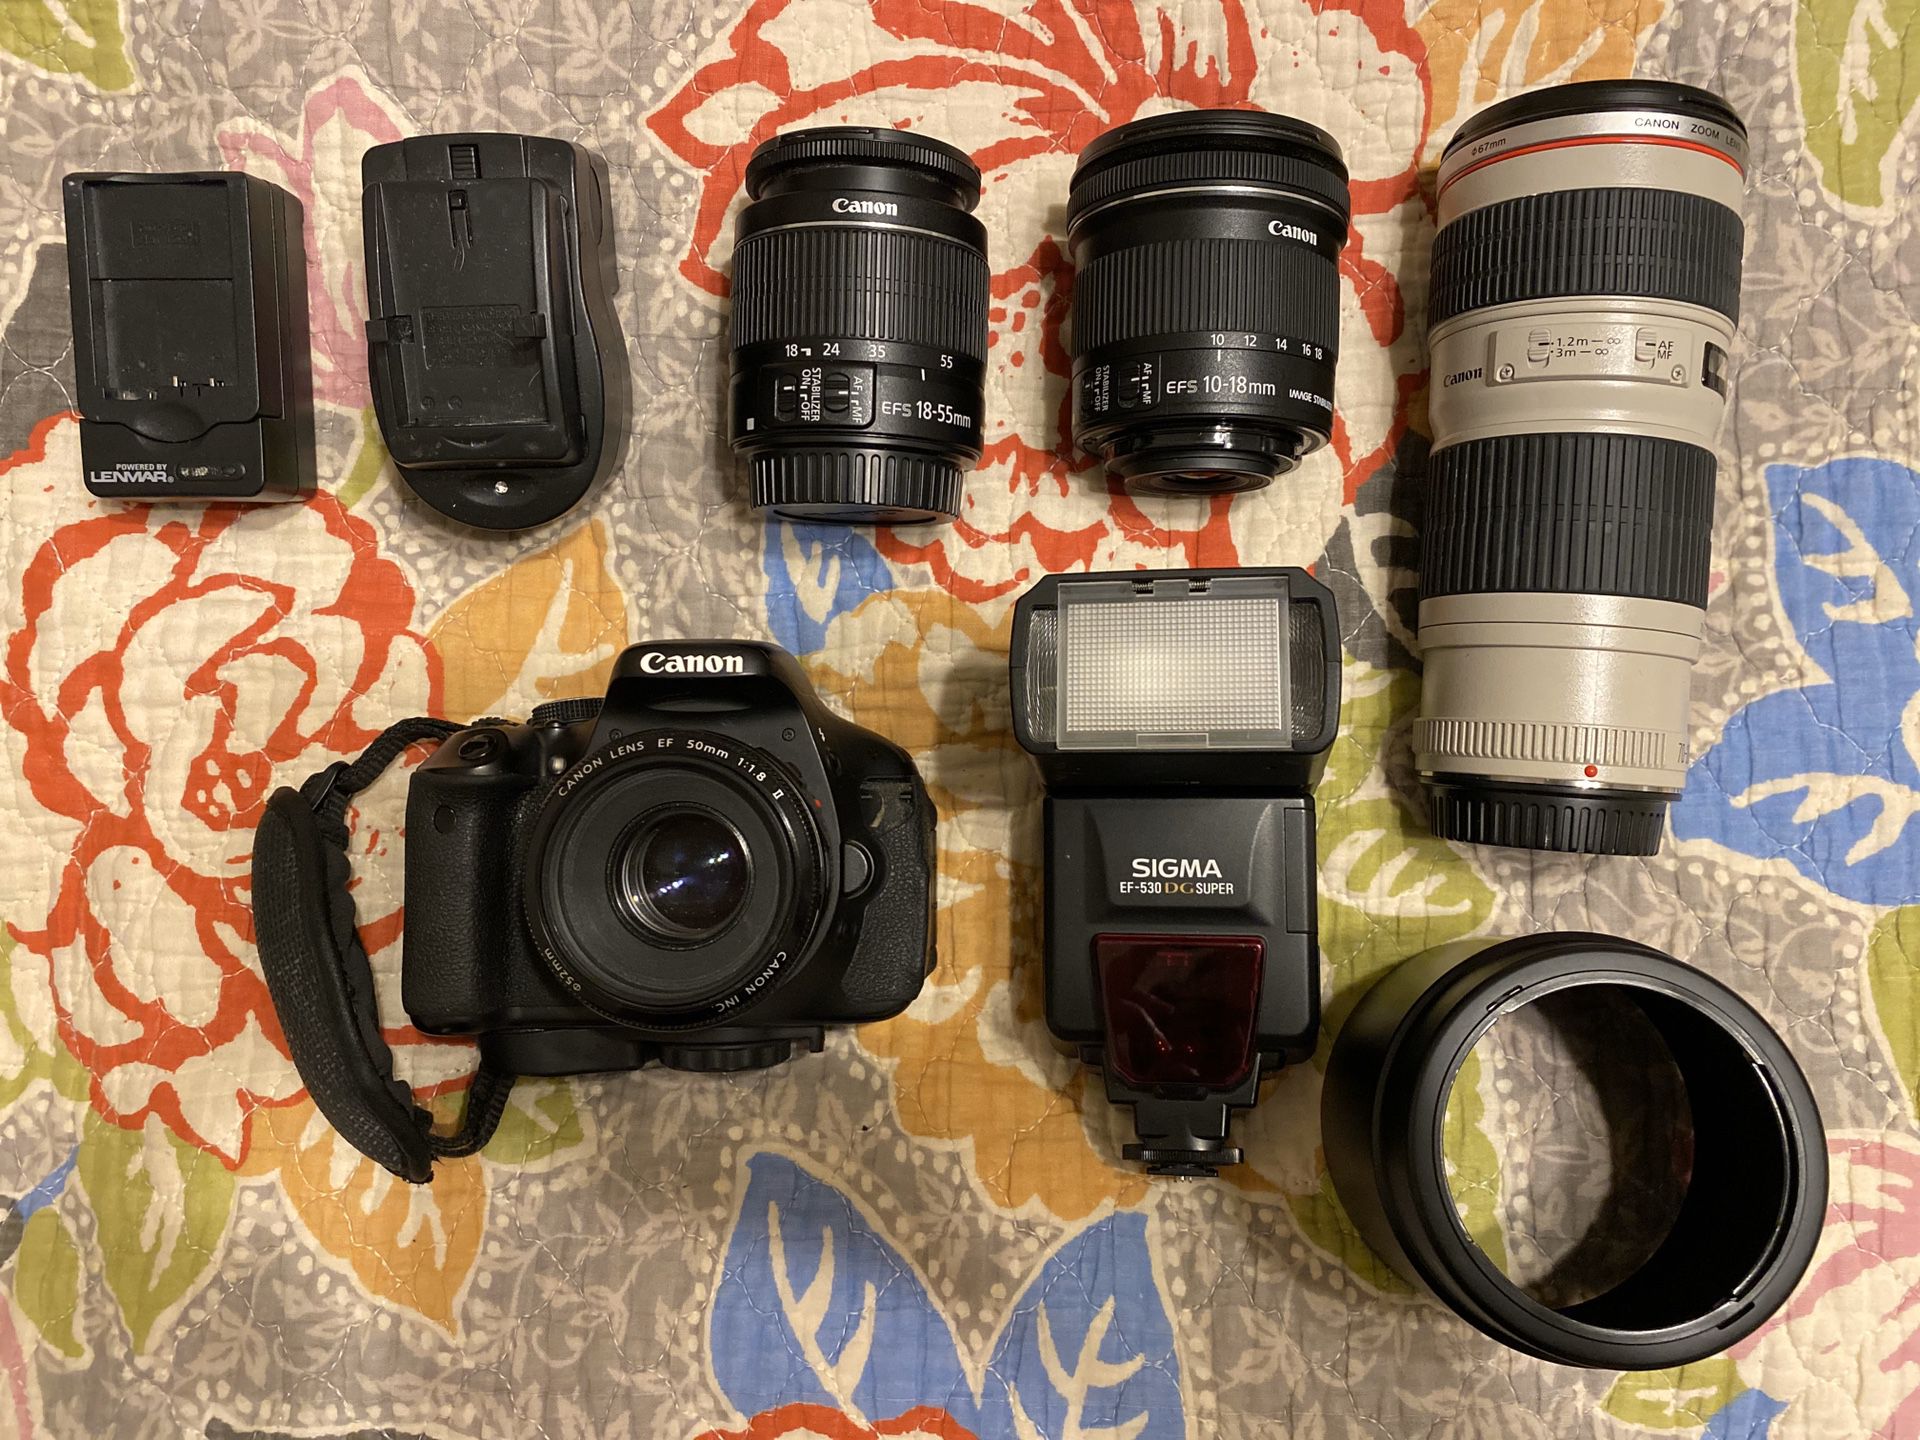 Canon T3i with four lenses and flash